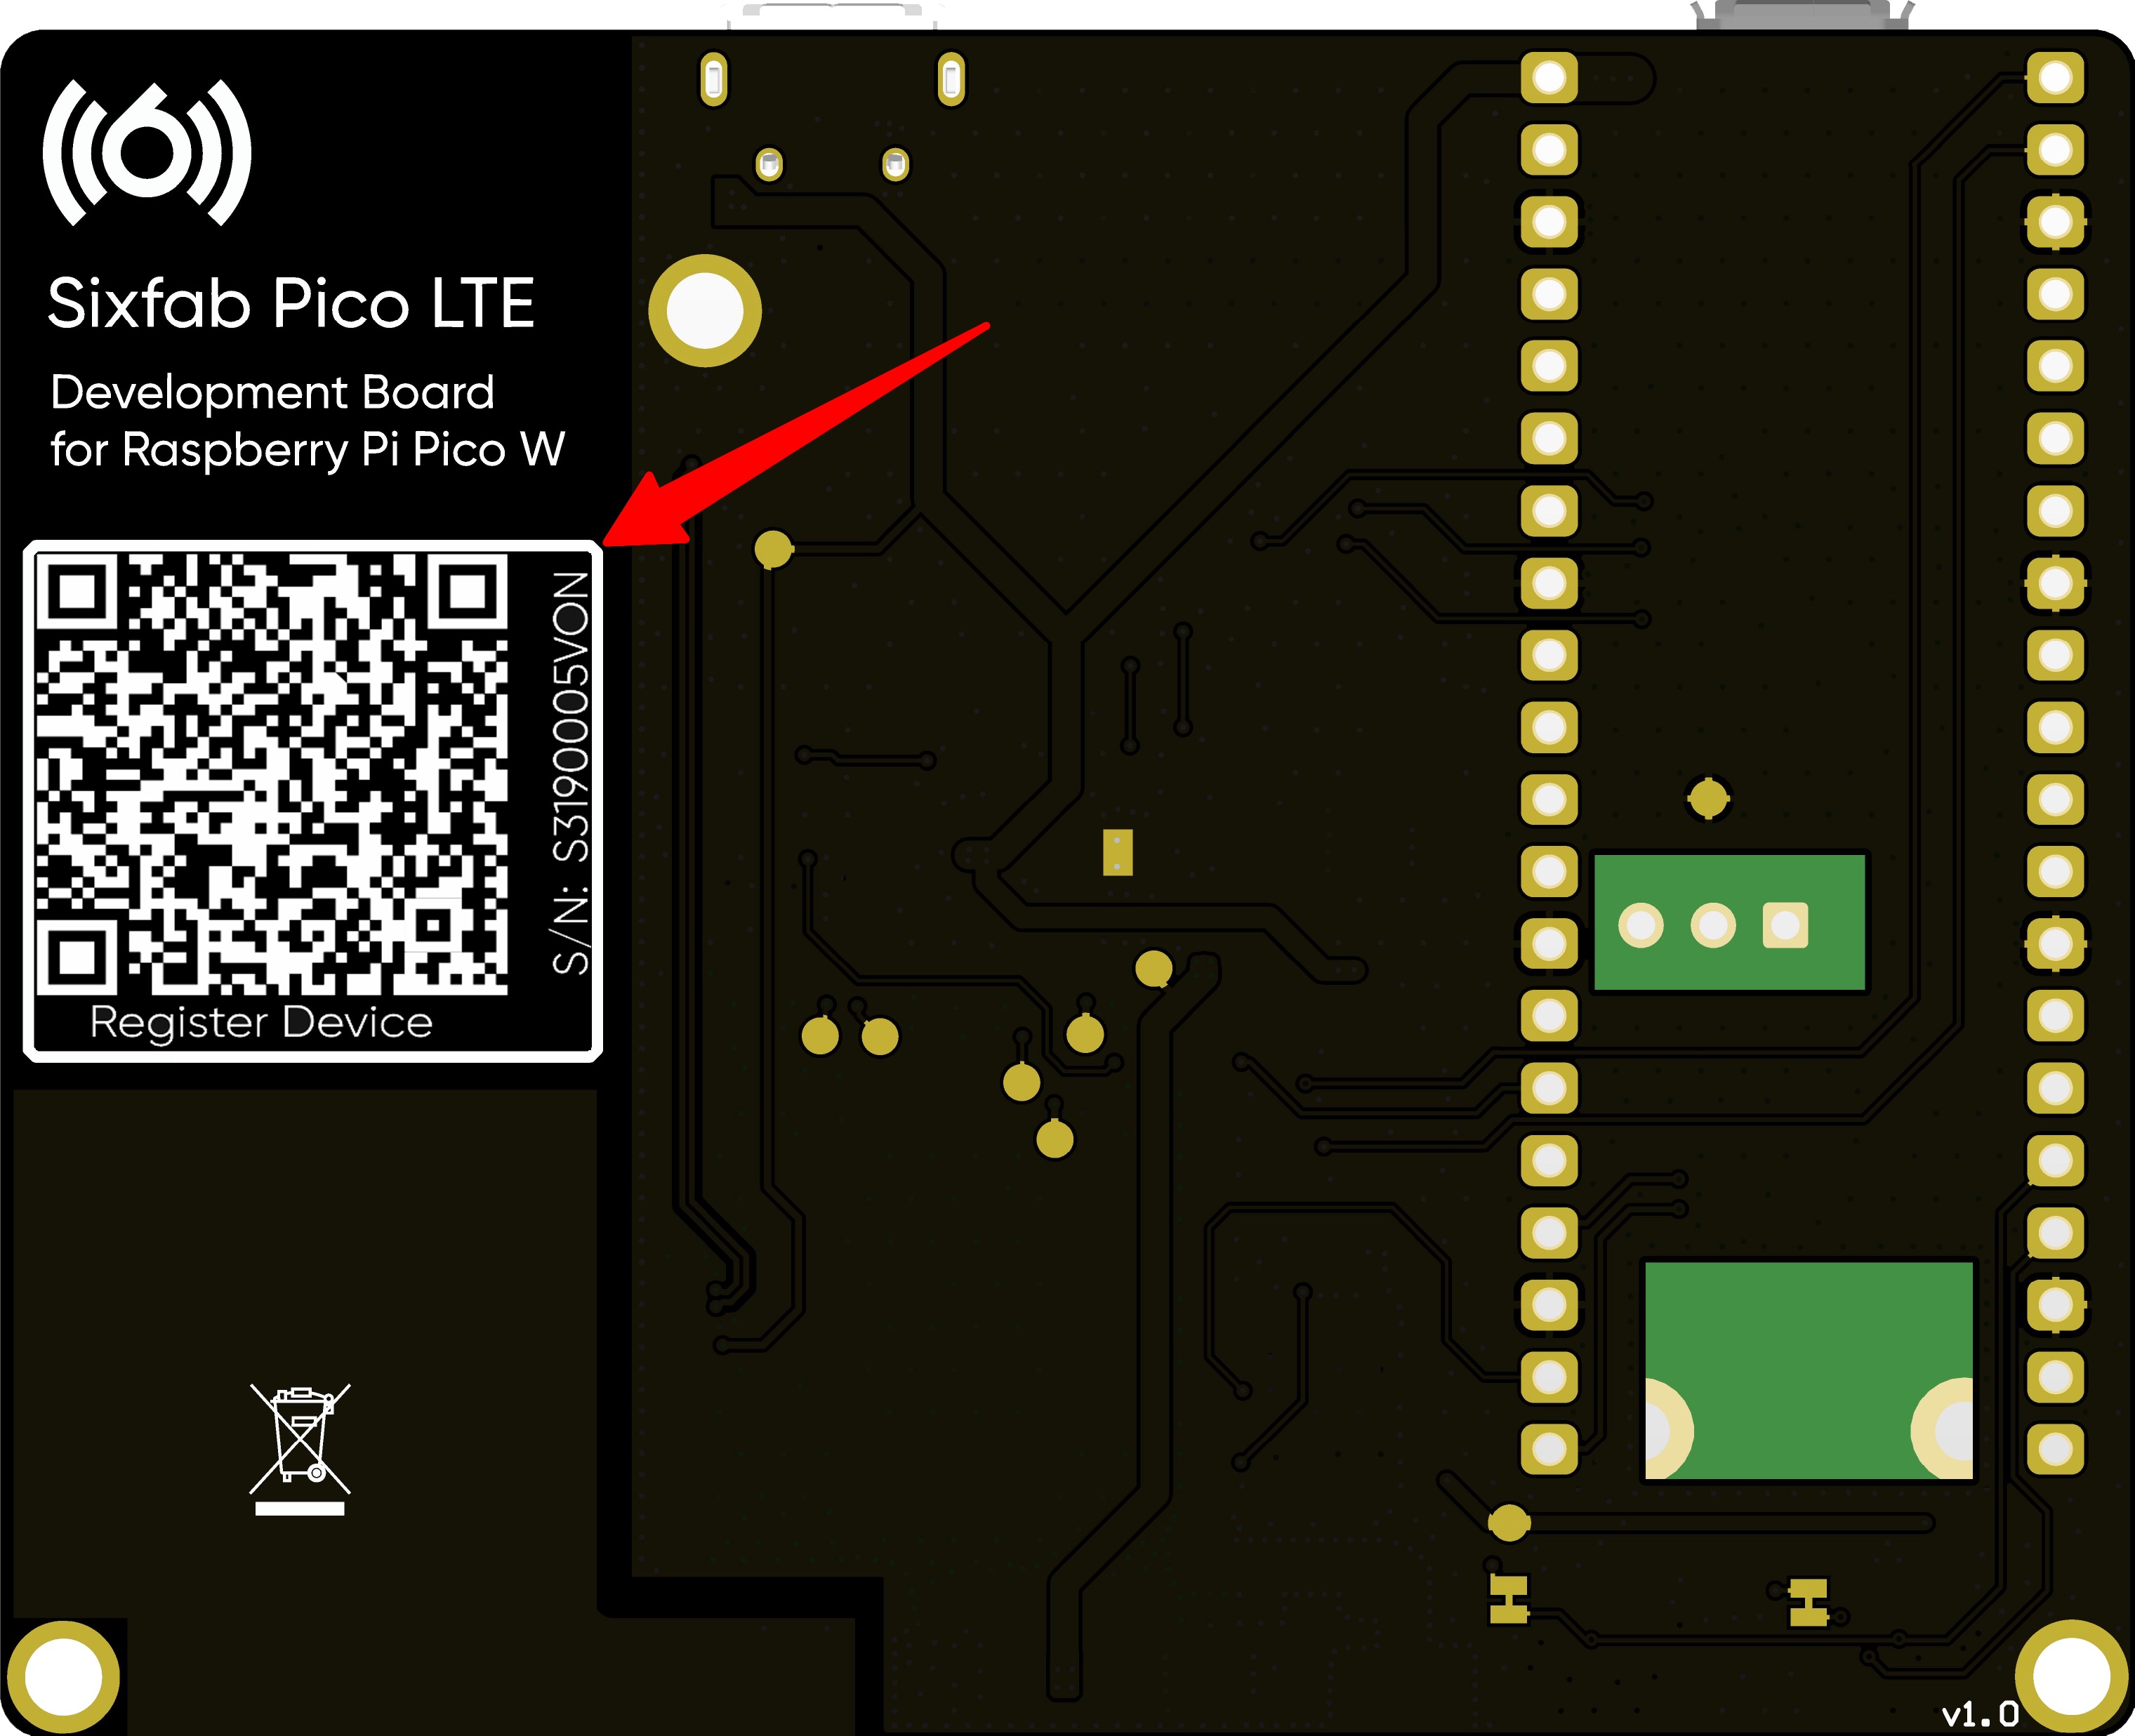 Scan the QR code on the back of the board to register the Pico LTE